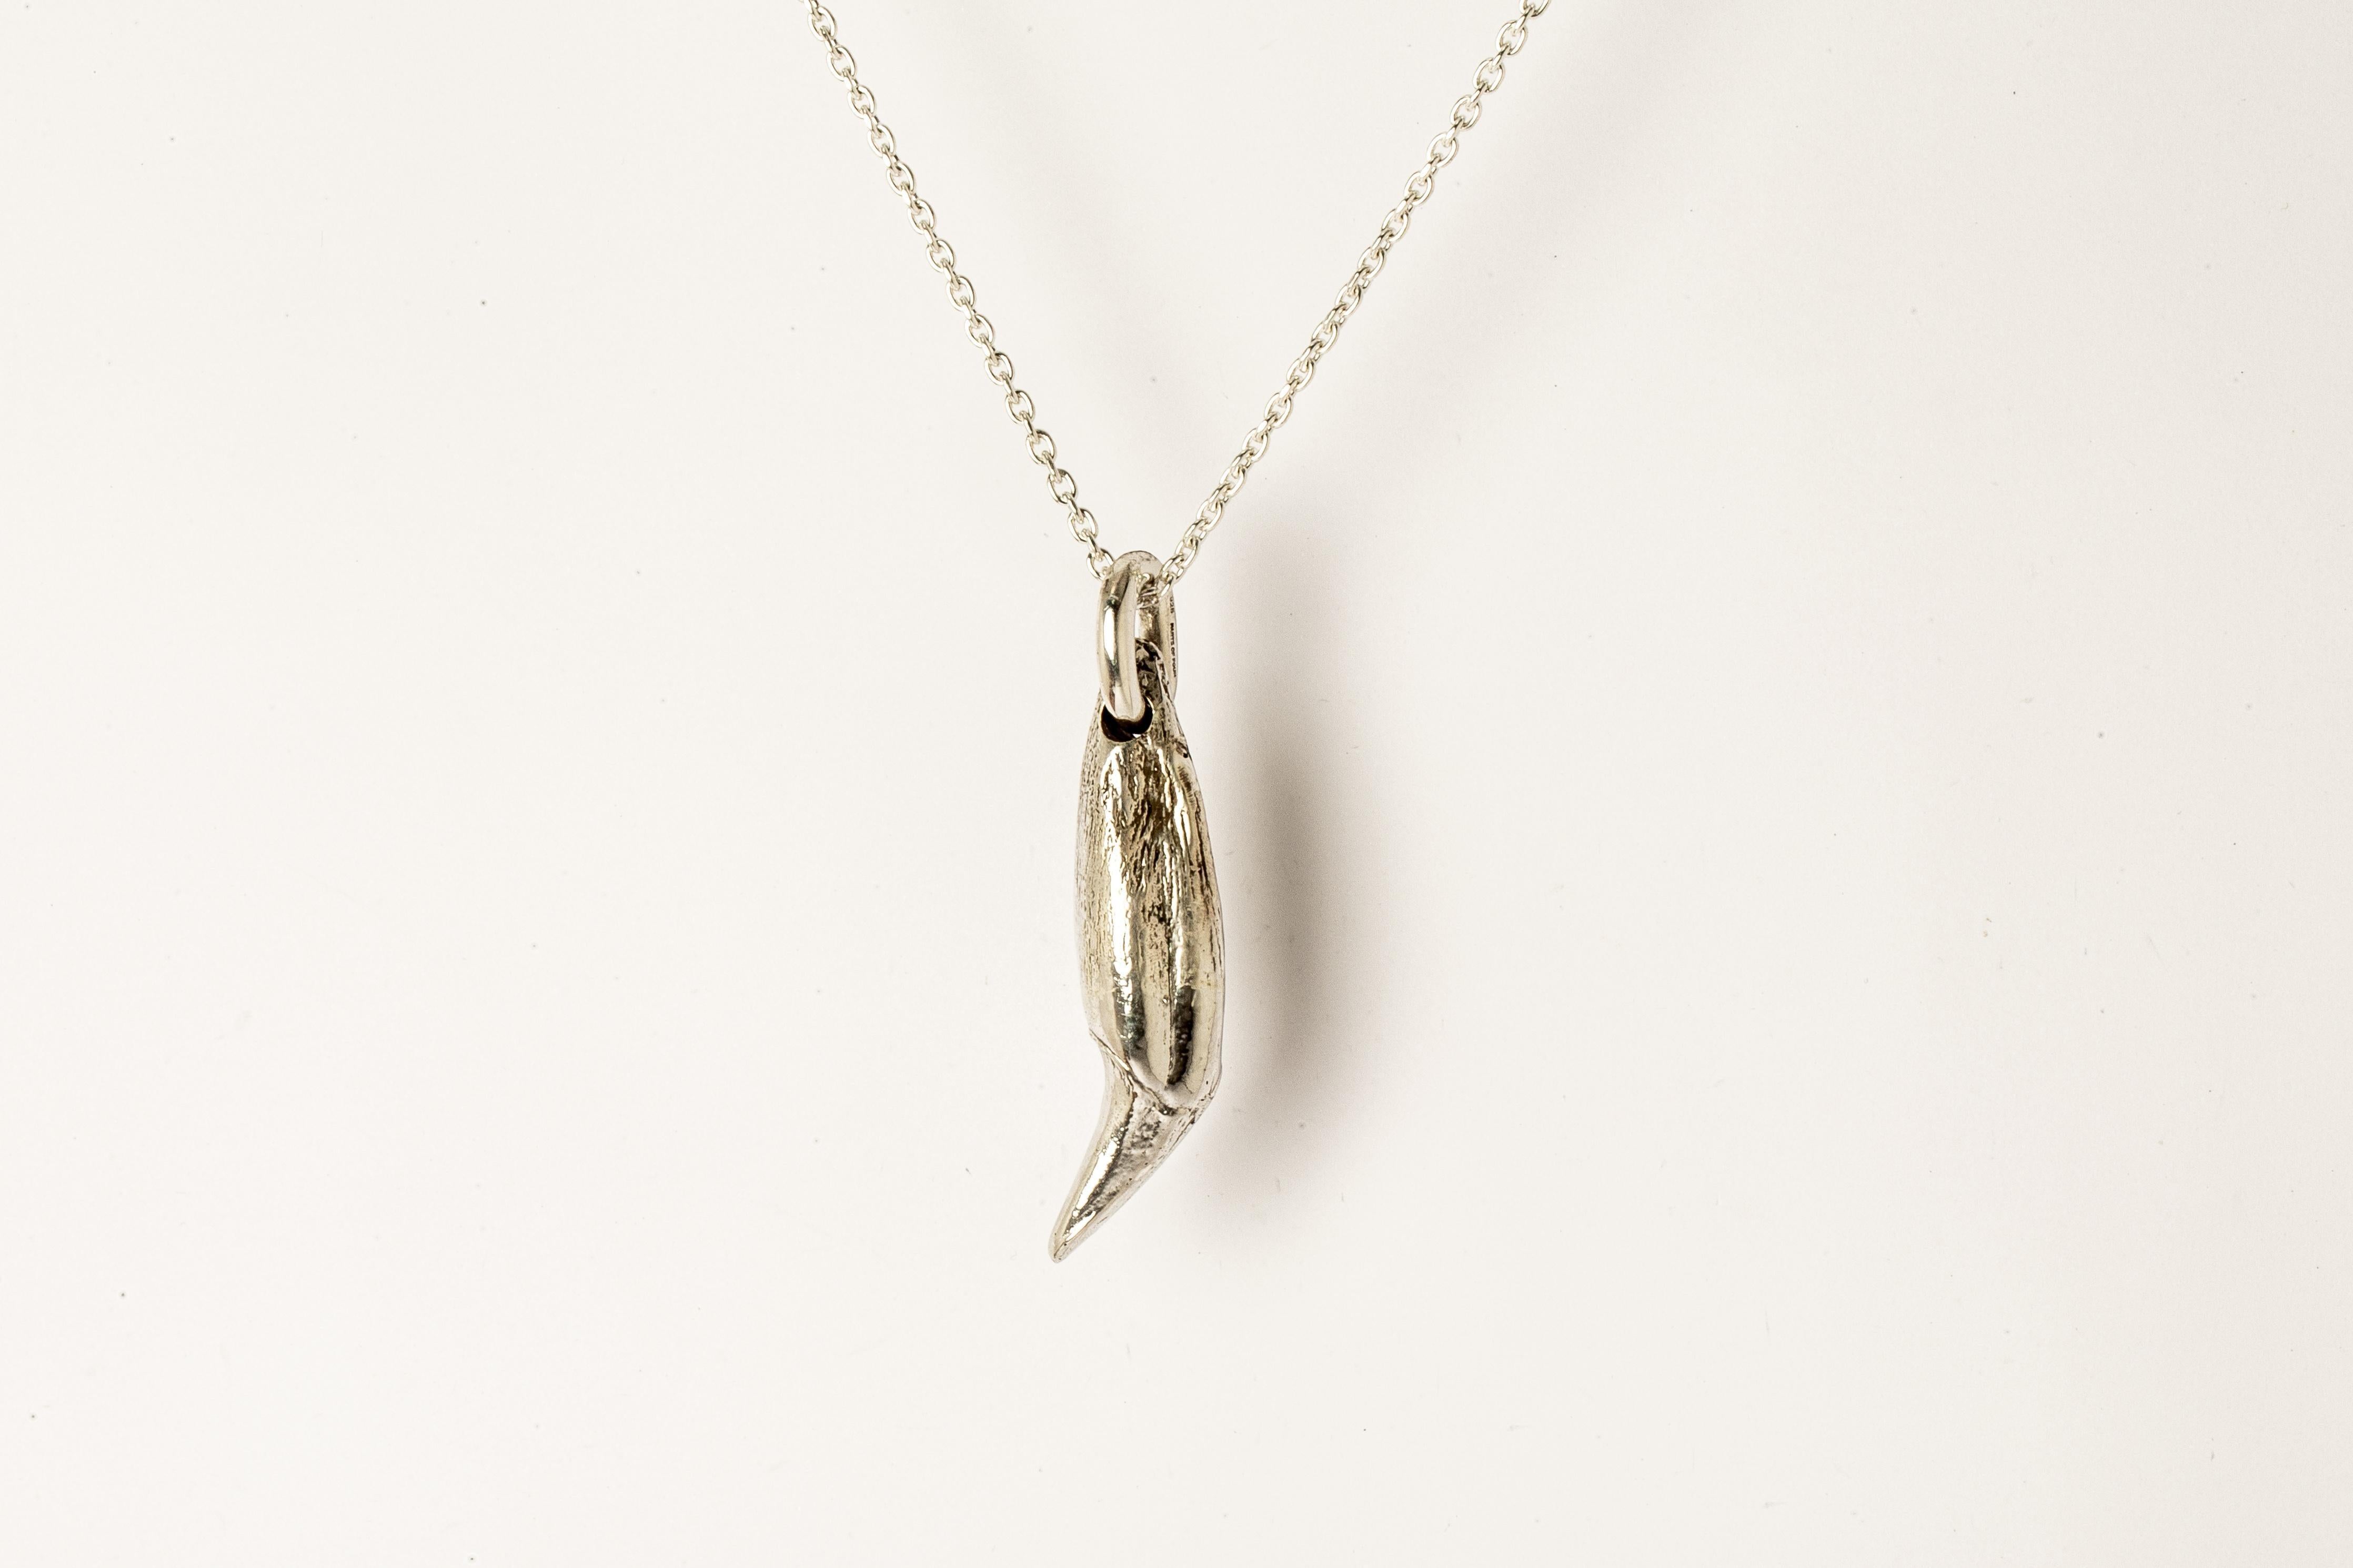 Bear Tooth Necklace Ghost (Medium, PA) In New Condition For Sale In Hong Kong, Hong Kong Island